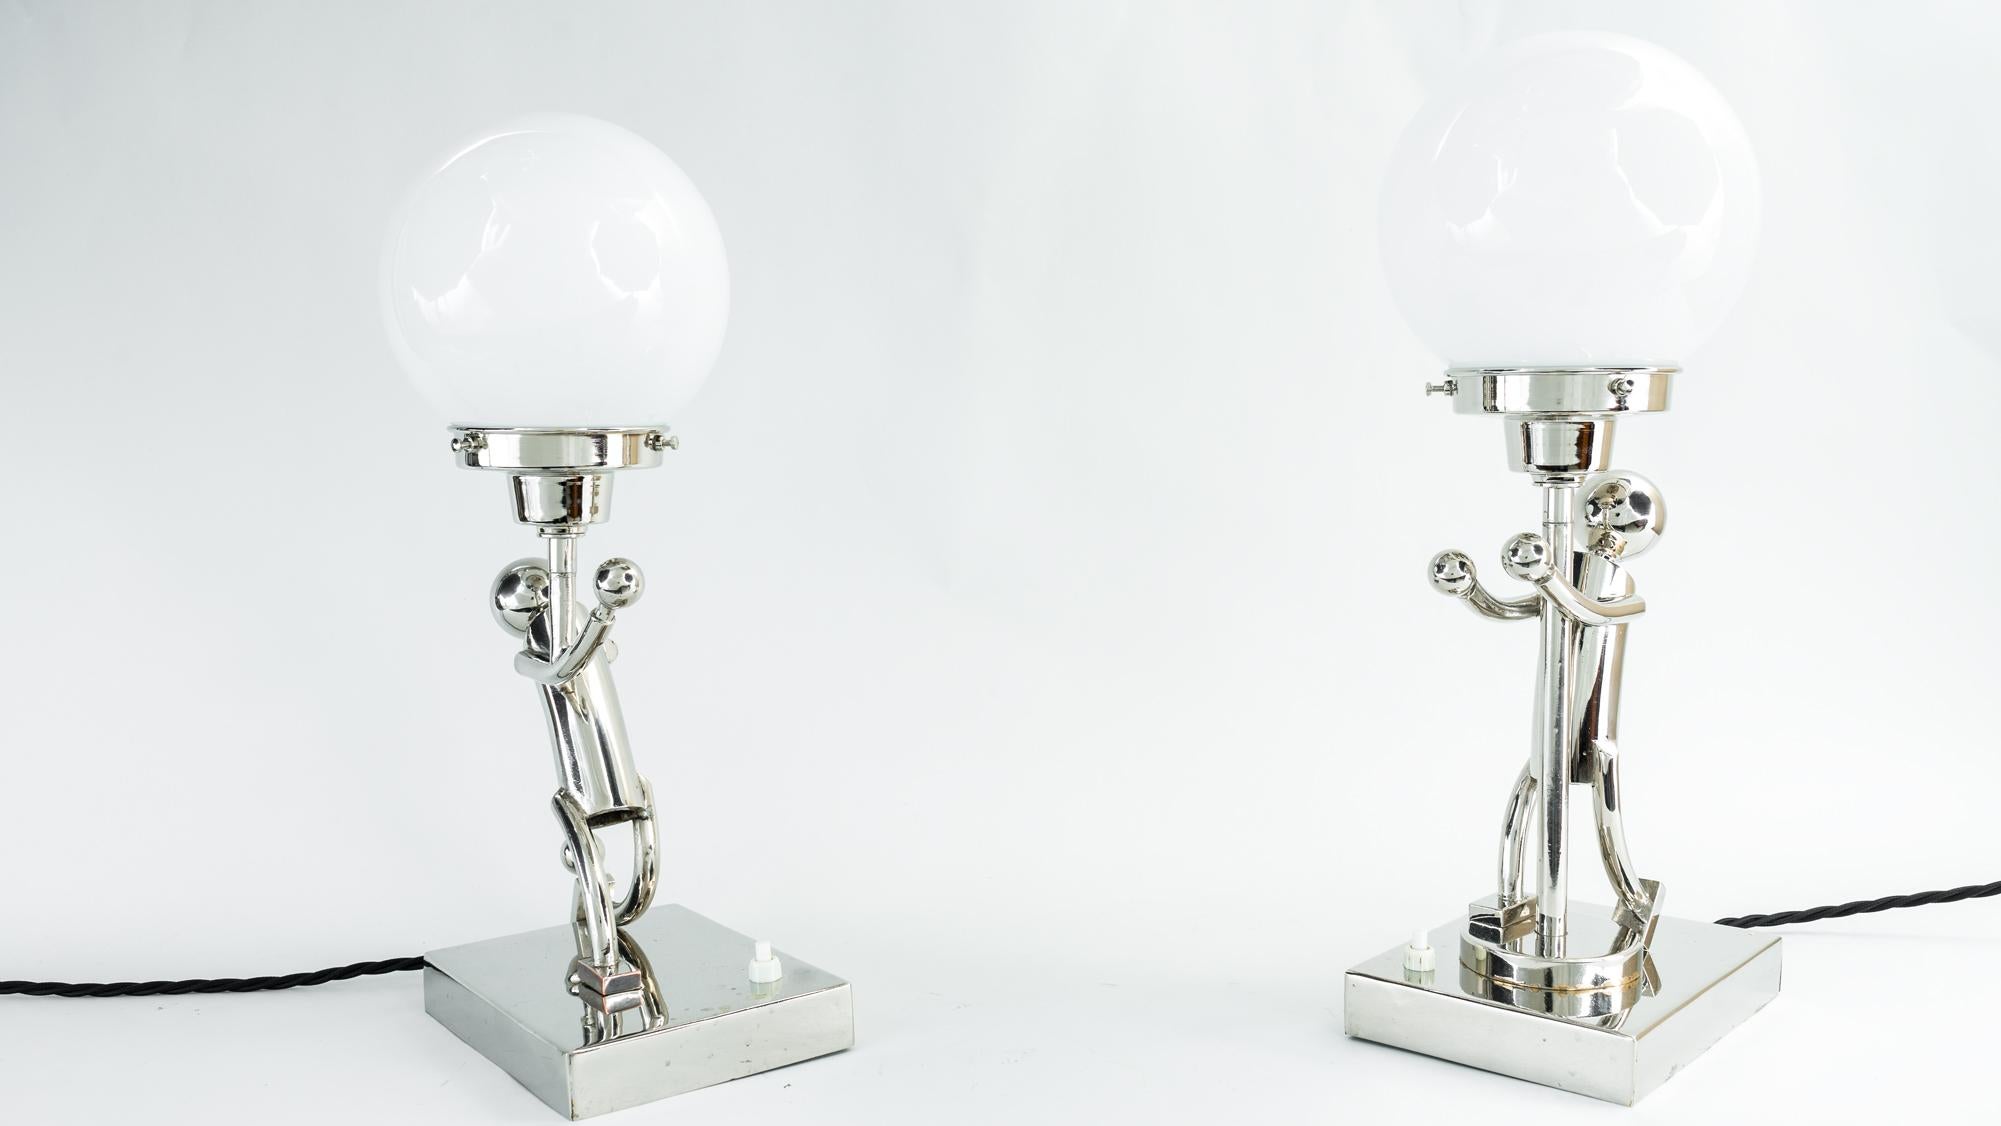 2 rare table lamps in style of Hagenauer, Vienna, circa 1920s
Brass nickel-plated
Original condition
Opal glass shades.